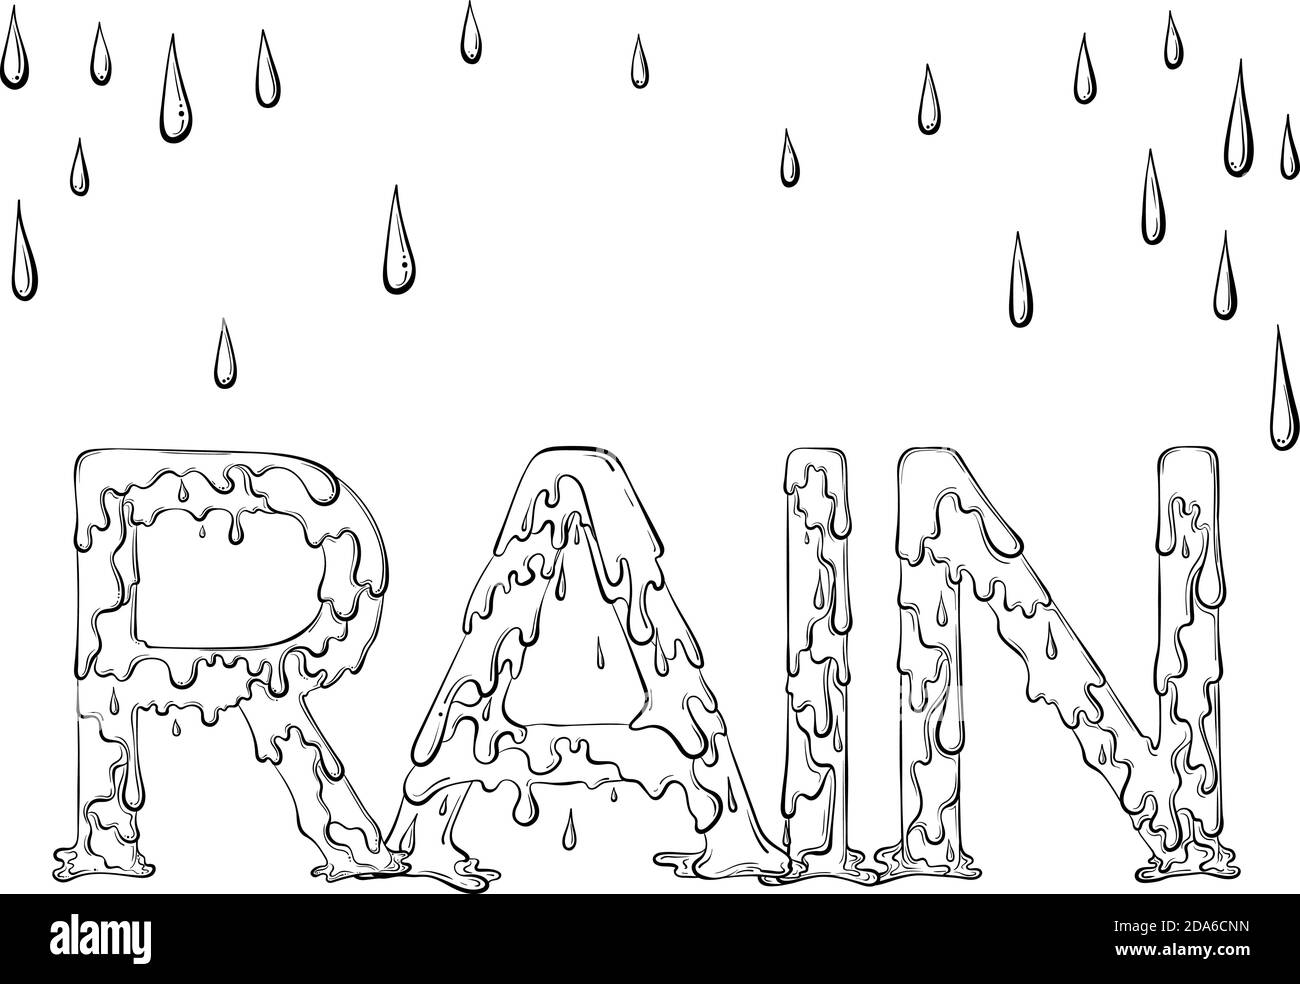 Lettering dripping word Rain. Vector illustration isolated on white background. Design for coloring book page in hand drawn style. Words for print, banners, posters, books. Stock Vector